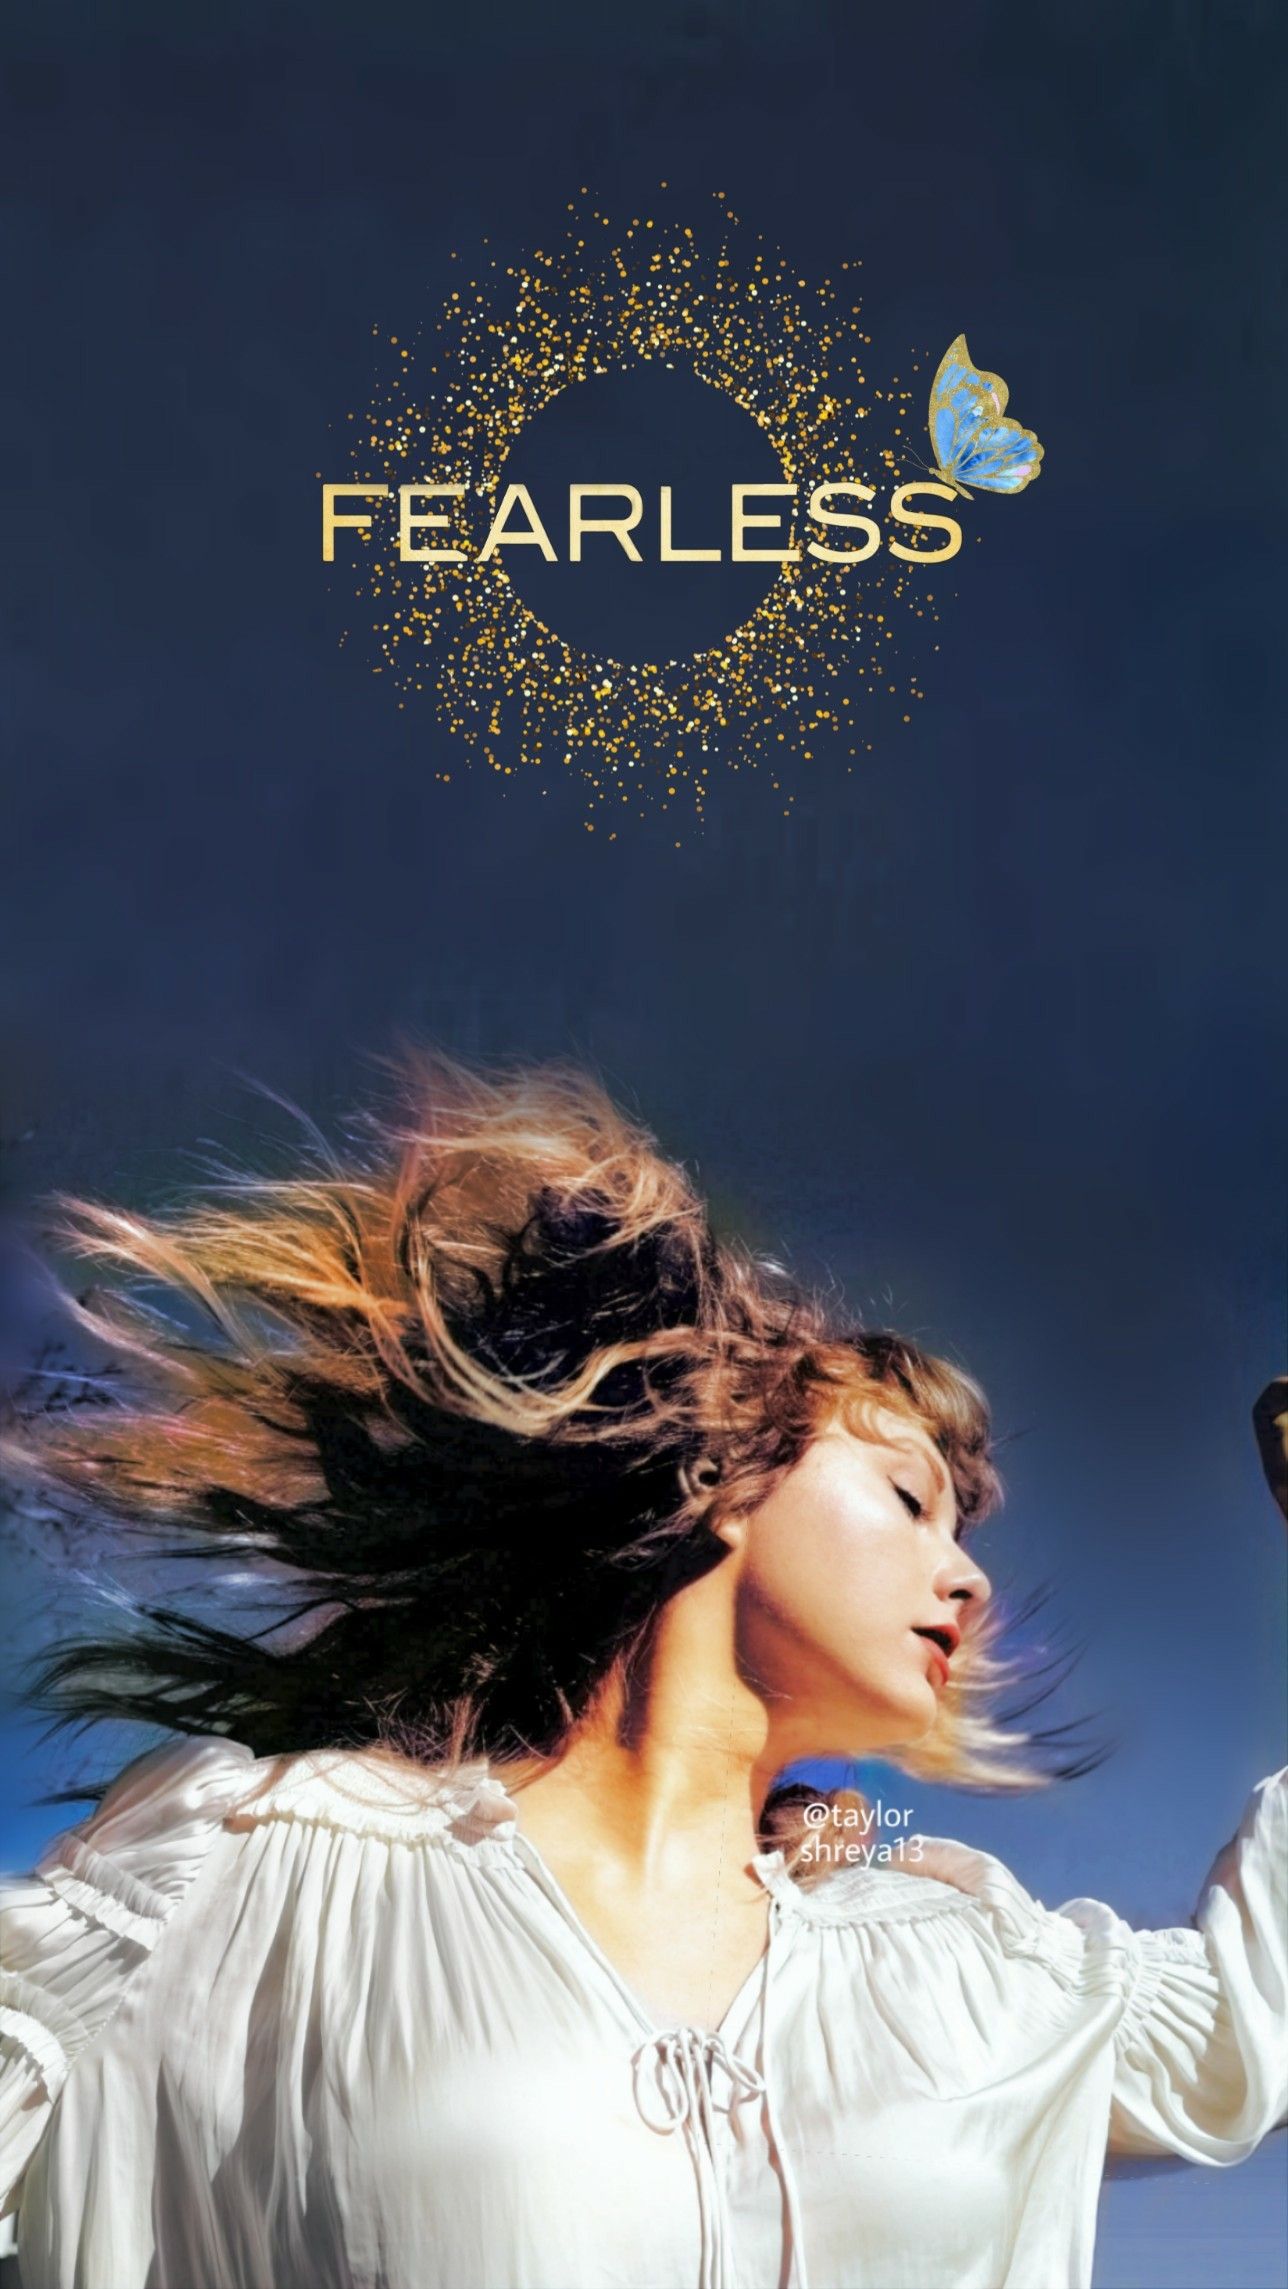 Fearless Taylor's Version Wallpapers - Wallpaper Cave